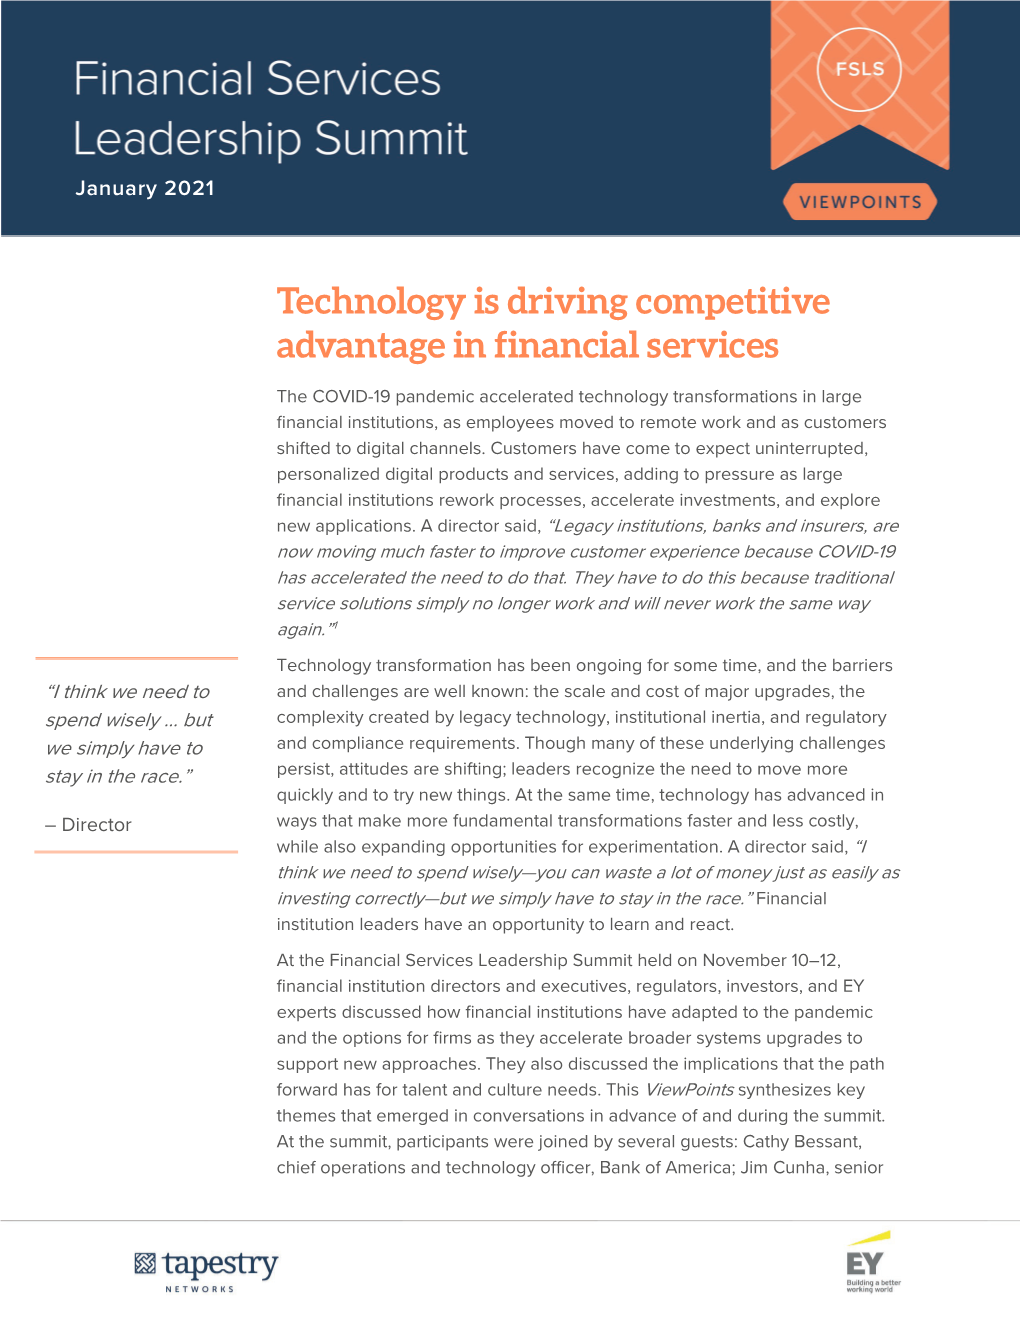 Technology Is Driving Competitive Advantage in Financial Services (Pdf)